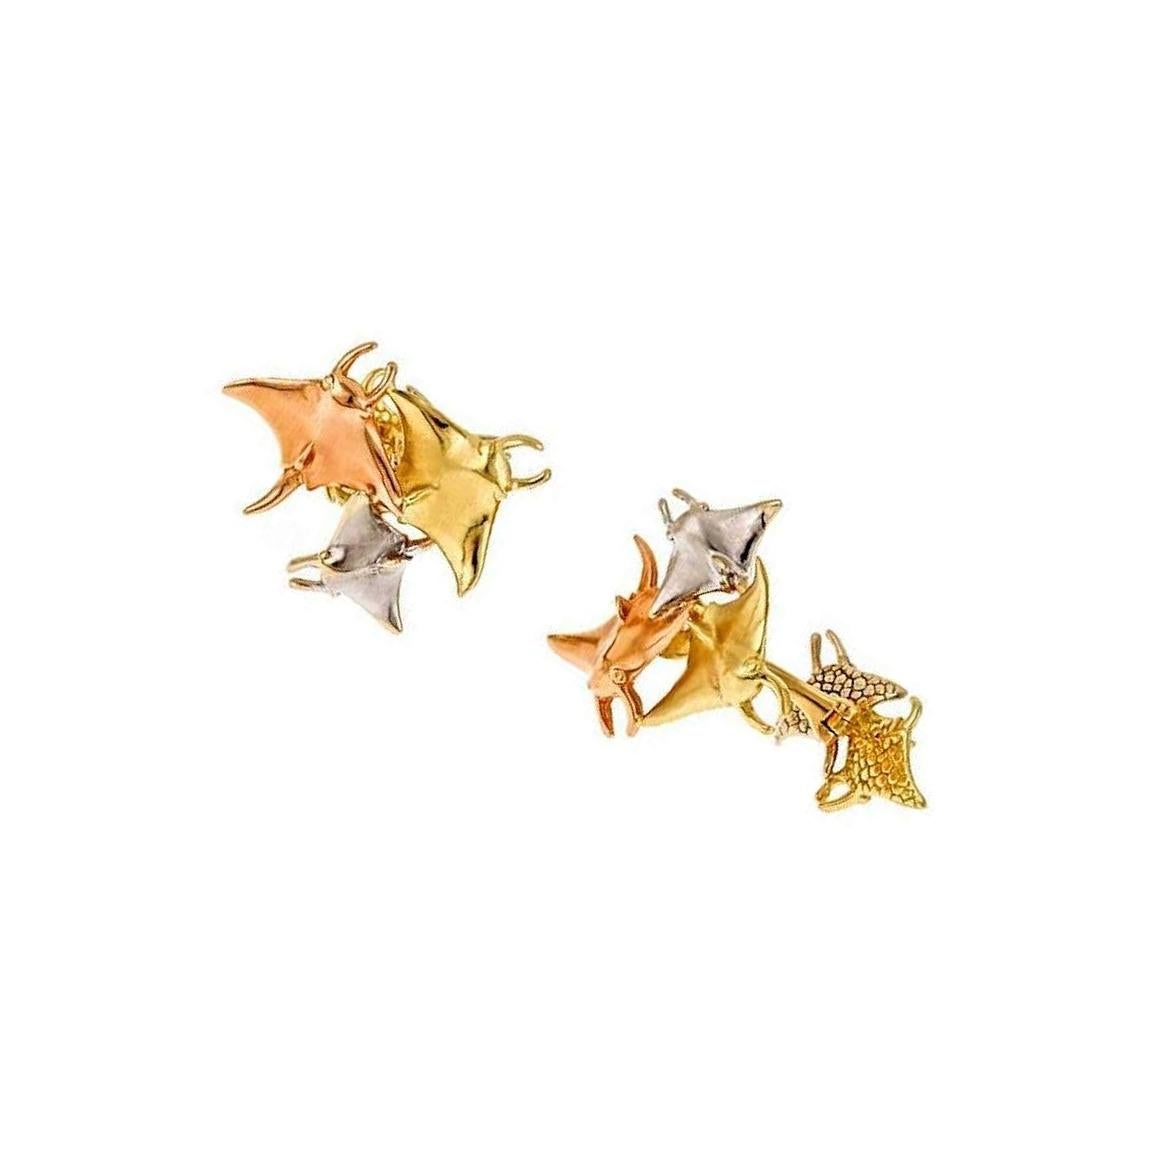 Contemporary 18k Yellow White and Rose Gold MANTA RAY Cufflinks by John Landrum Bryant For Sale